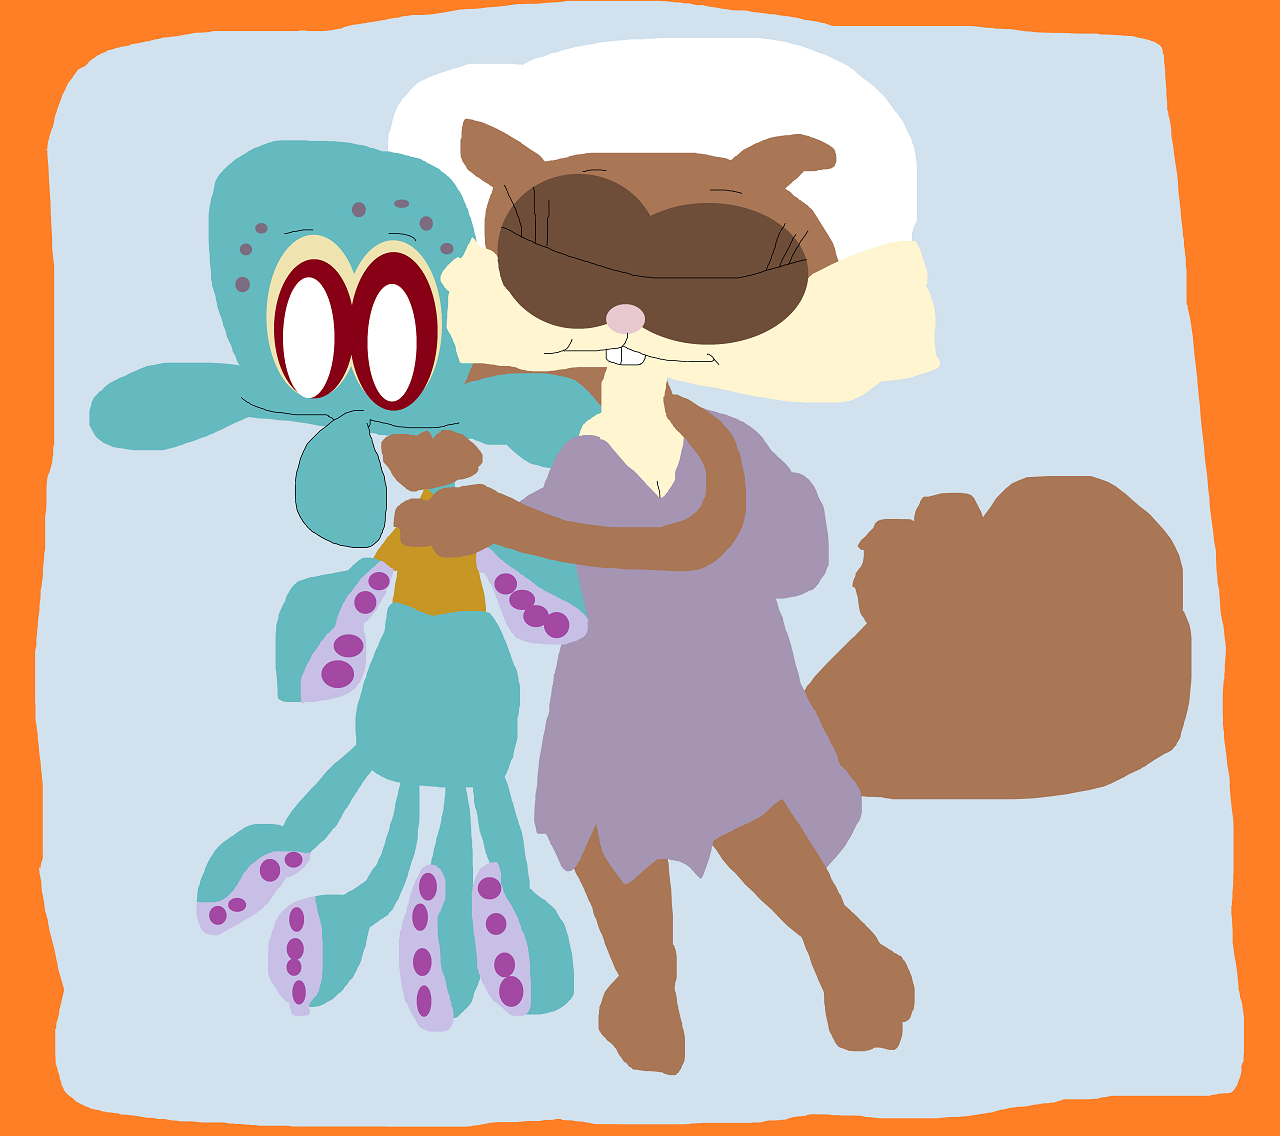 Sandy Snuggling With A Giant Squidward Plush by Falconlobo